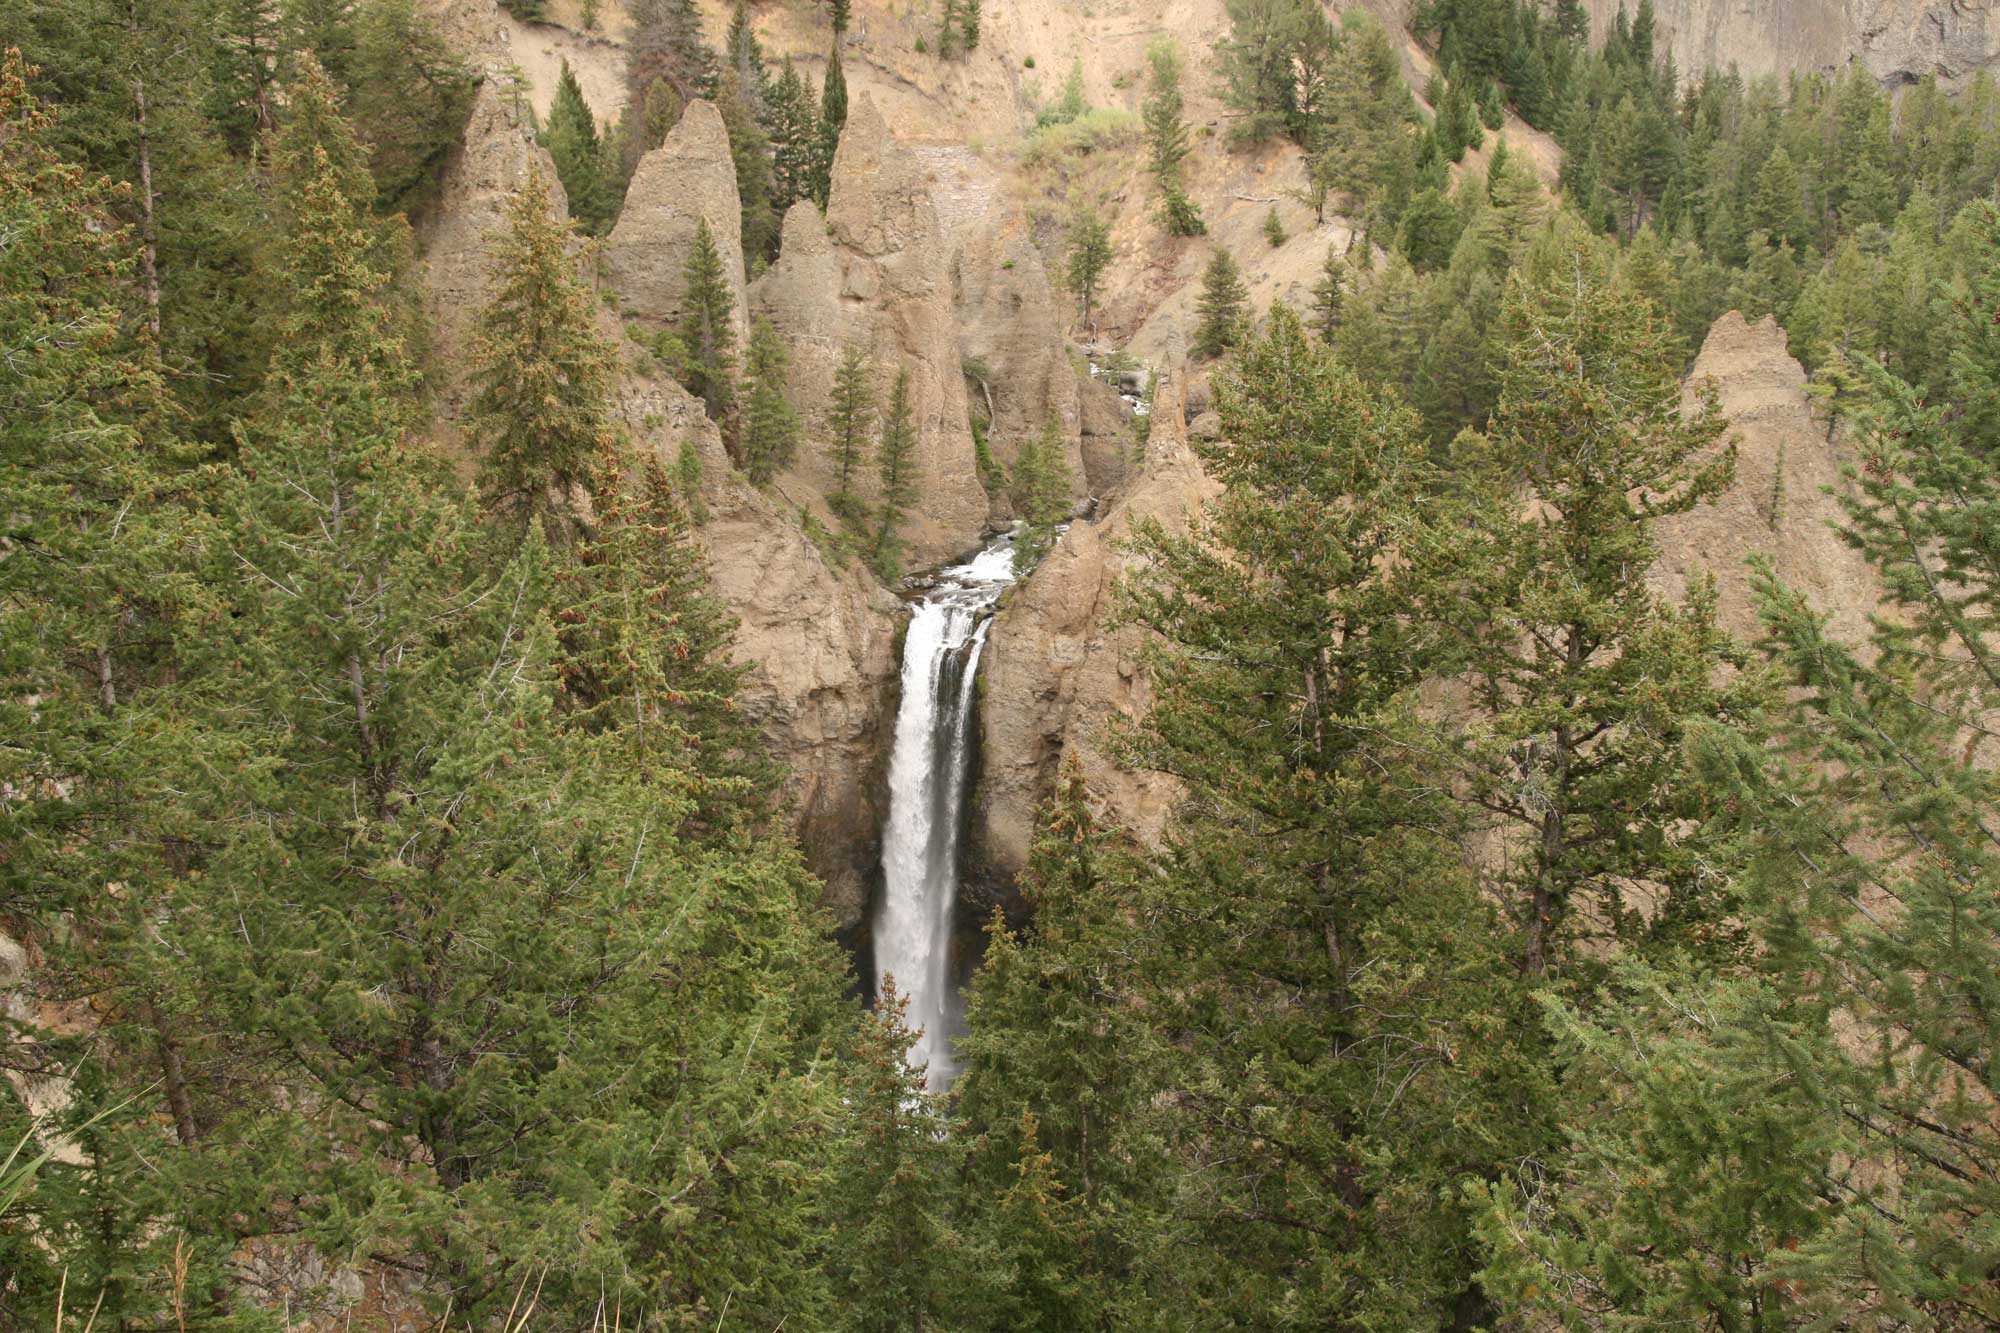 Photograph of Tower Fall, Yellowstone National Park. The photograph shows a tall, narrow waterfall dropping from a cliff at the center of the image. Brown rocky peaks rise around it. The landscape is dotted with conifers.